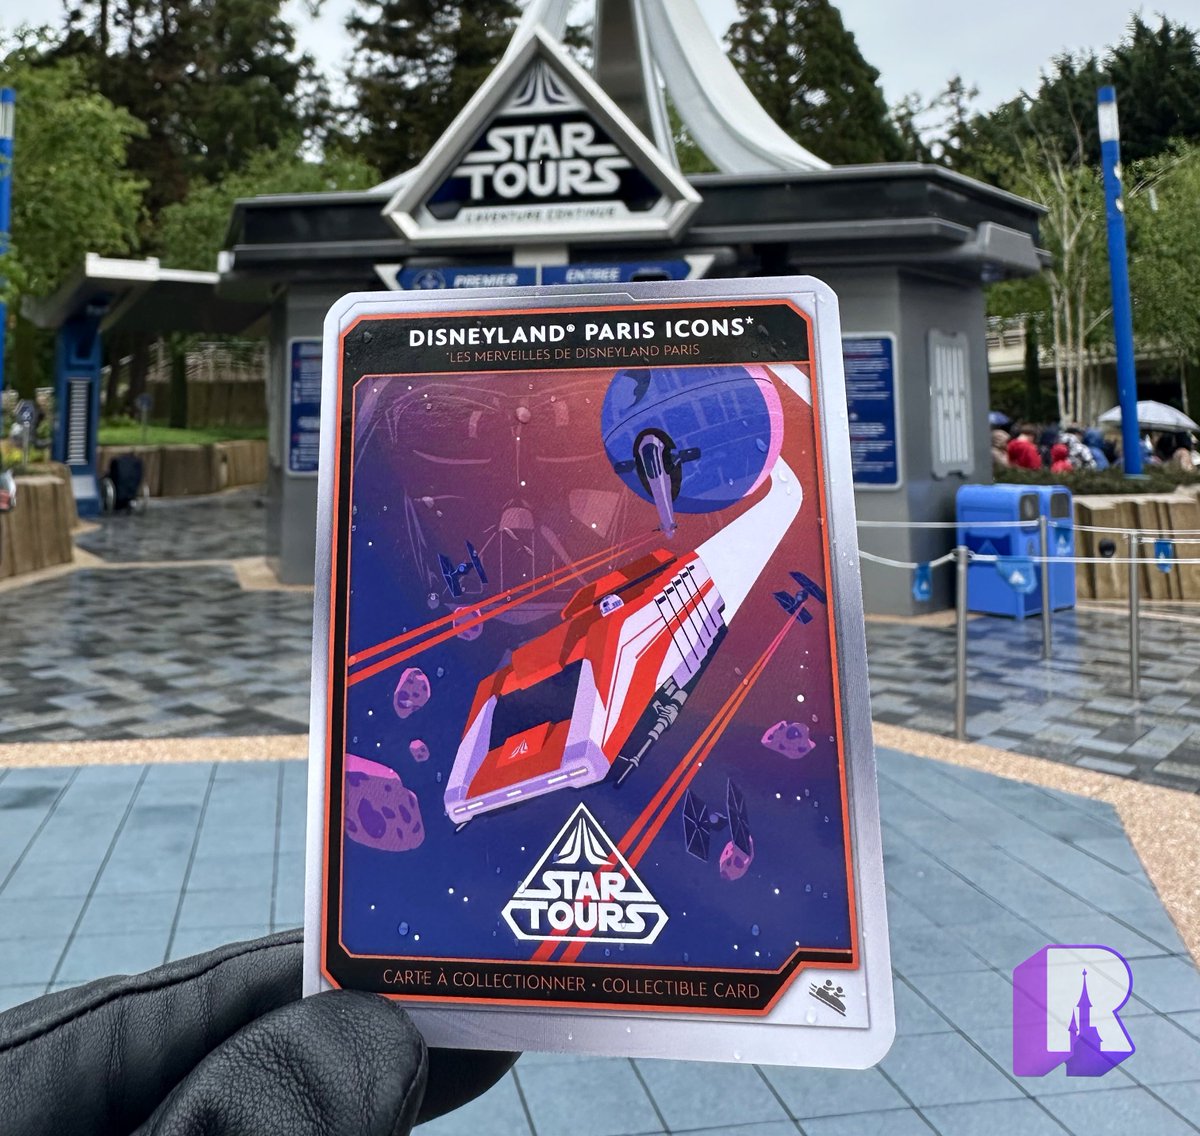 A set of 3 free Star Wars themed collectible cards is available to collect today from select Cast Members for #MayThe4th: